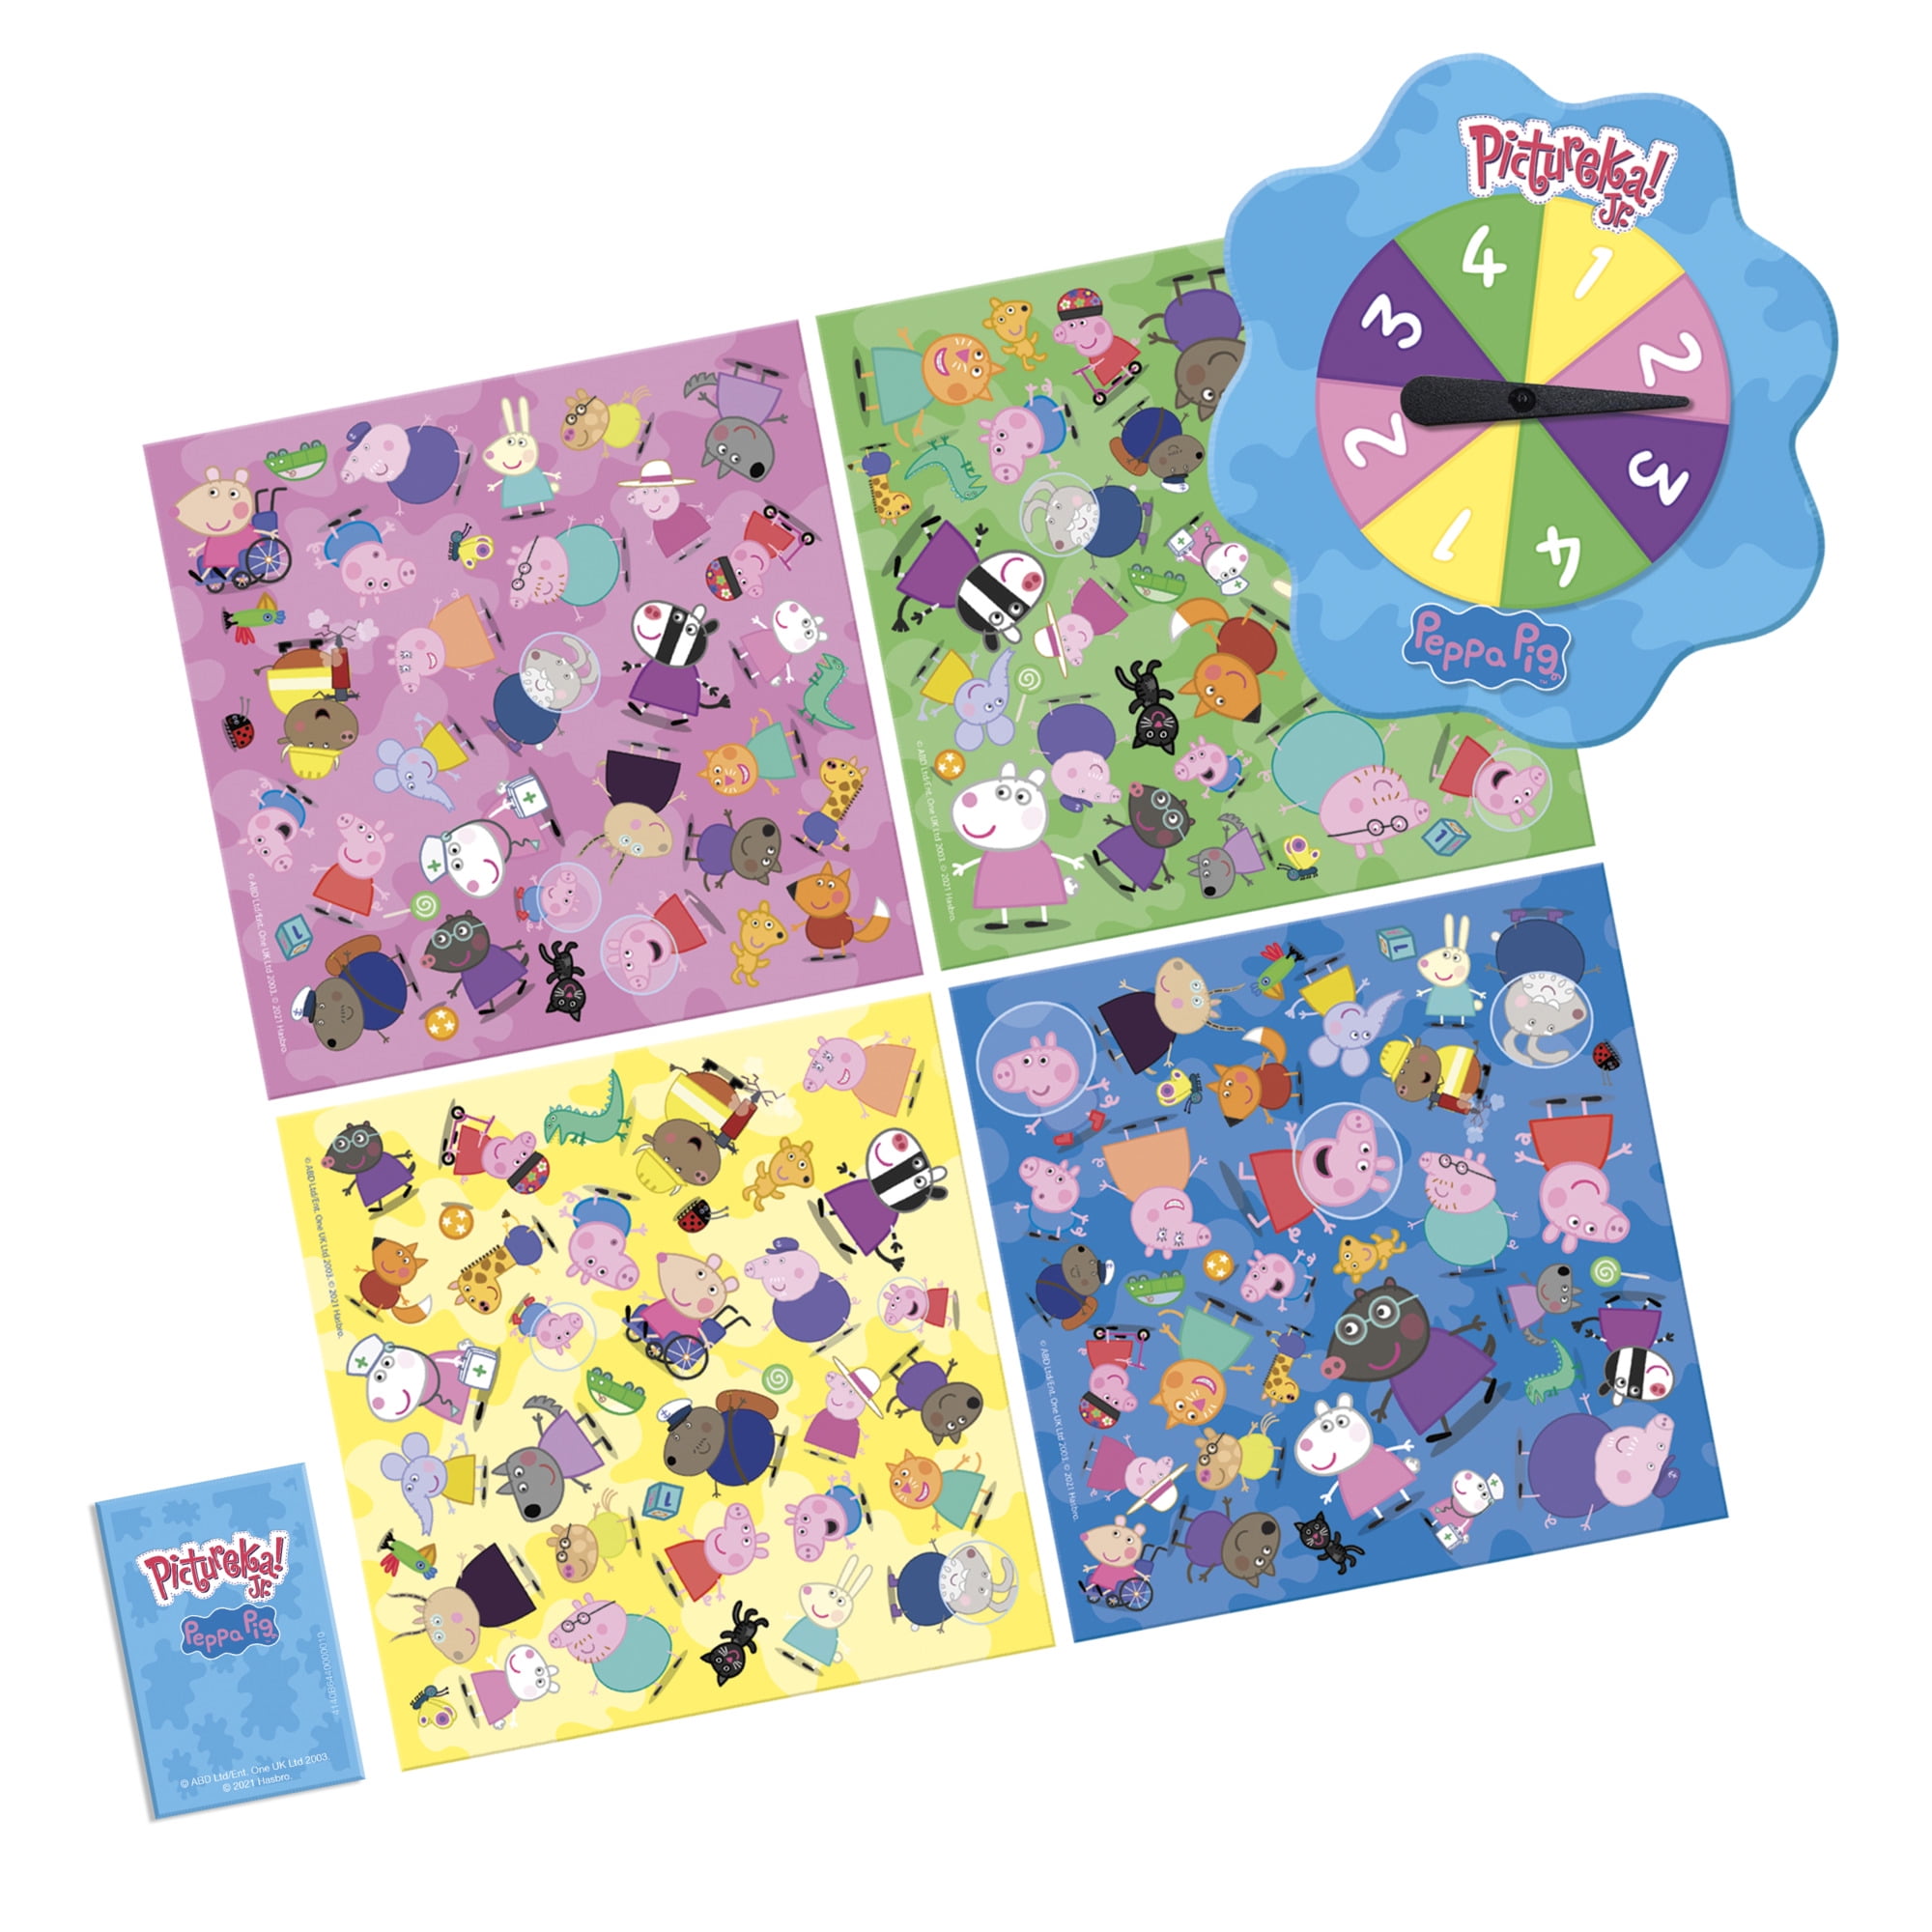 Junior Peppa Pig Game Pictureka No Reading Required Game Games for 4 Year Olds and Up Picture Game Fun Board Game for Preschoolers English Version 